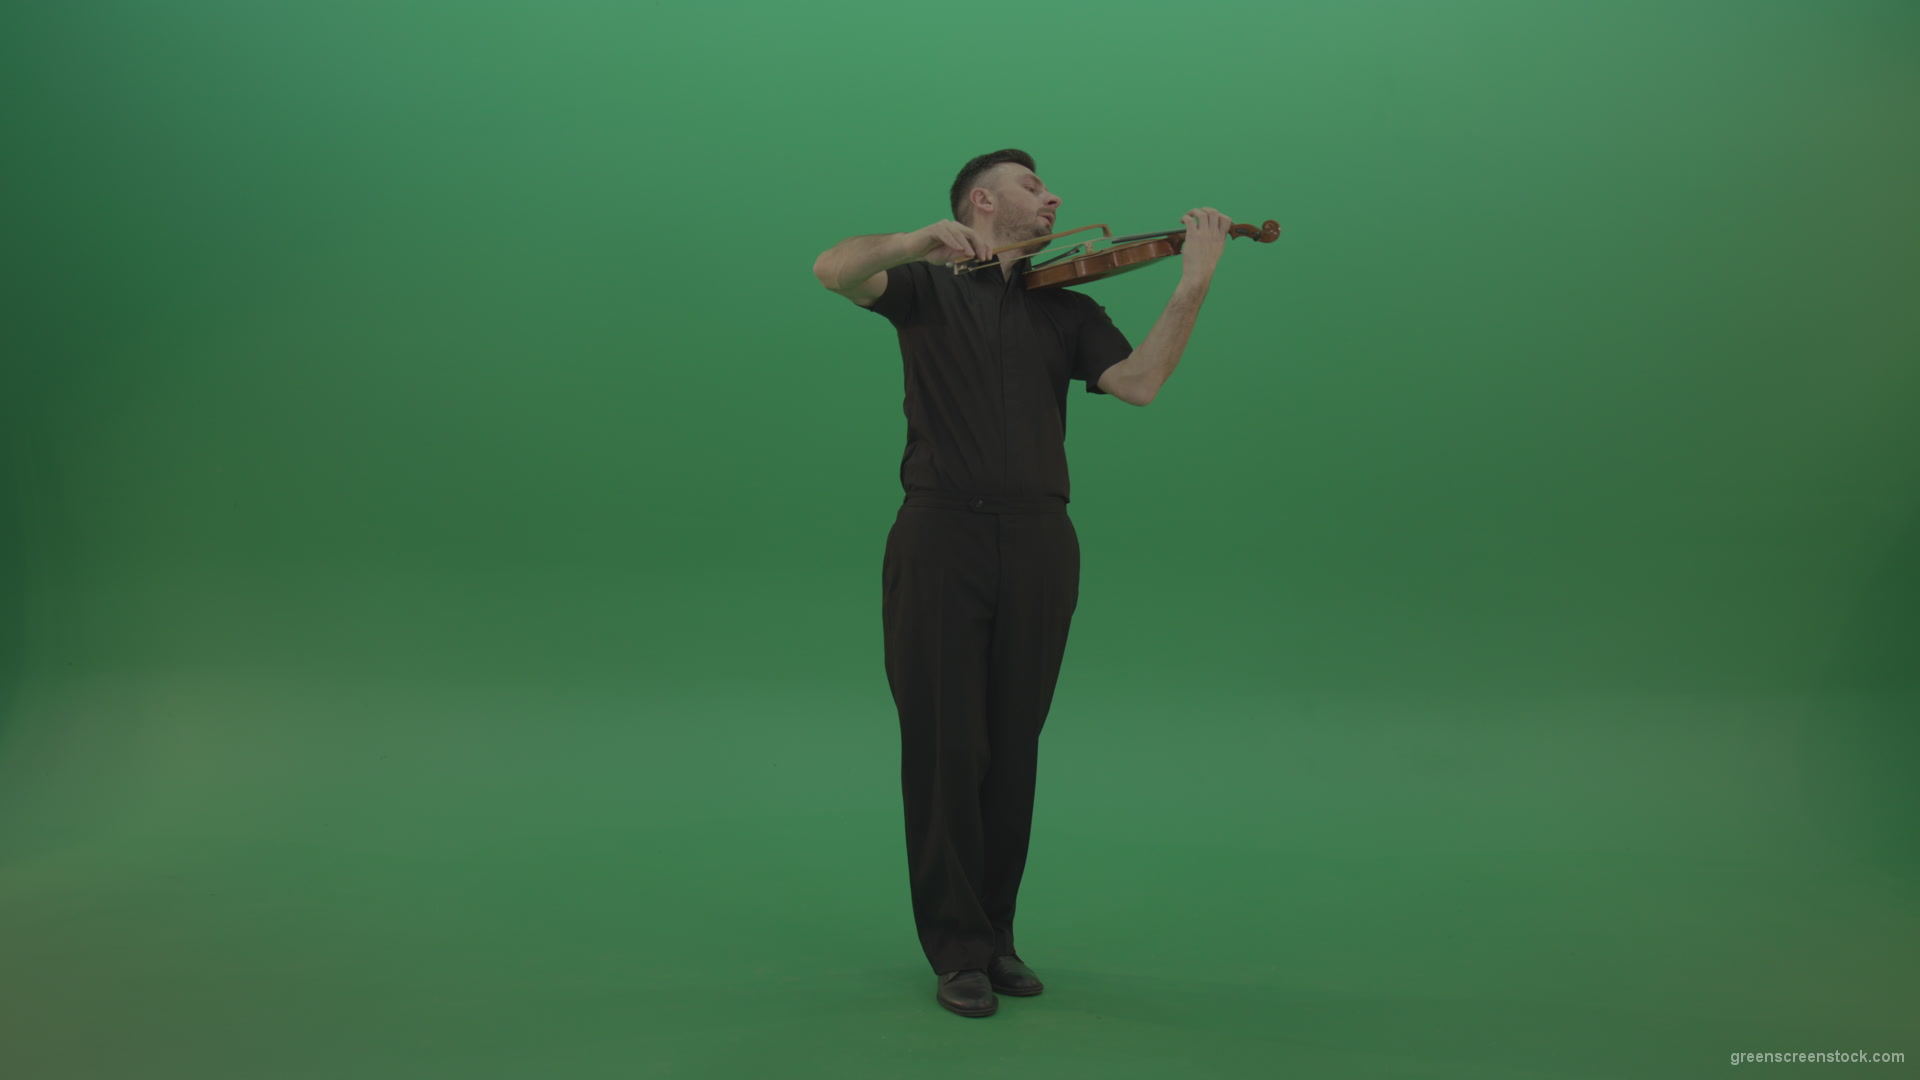 Full-size-view-virtuoso-Man-in-black-costume-play-violin-fiddle-strings-music-instument-on-green-screen_008 Green Screen Stock